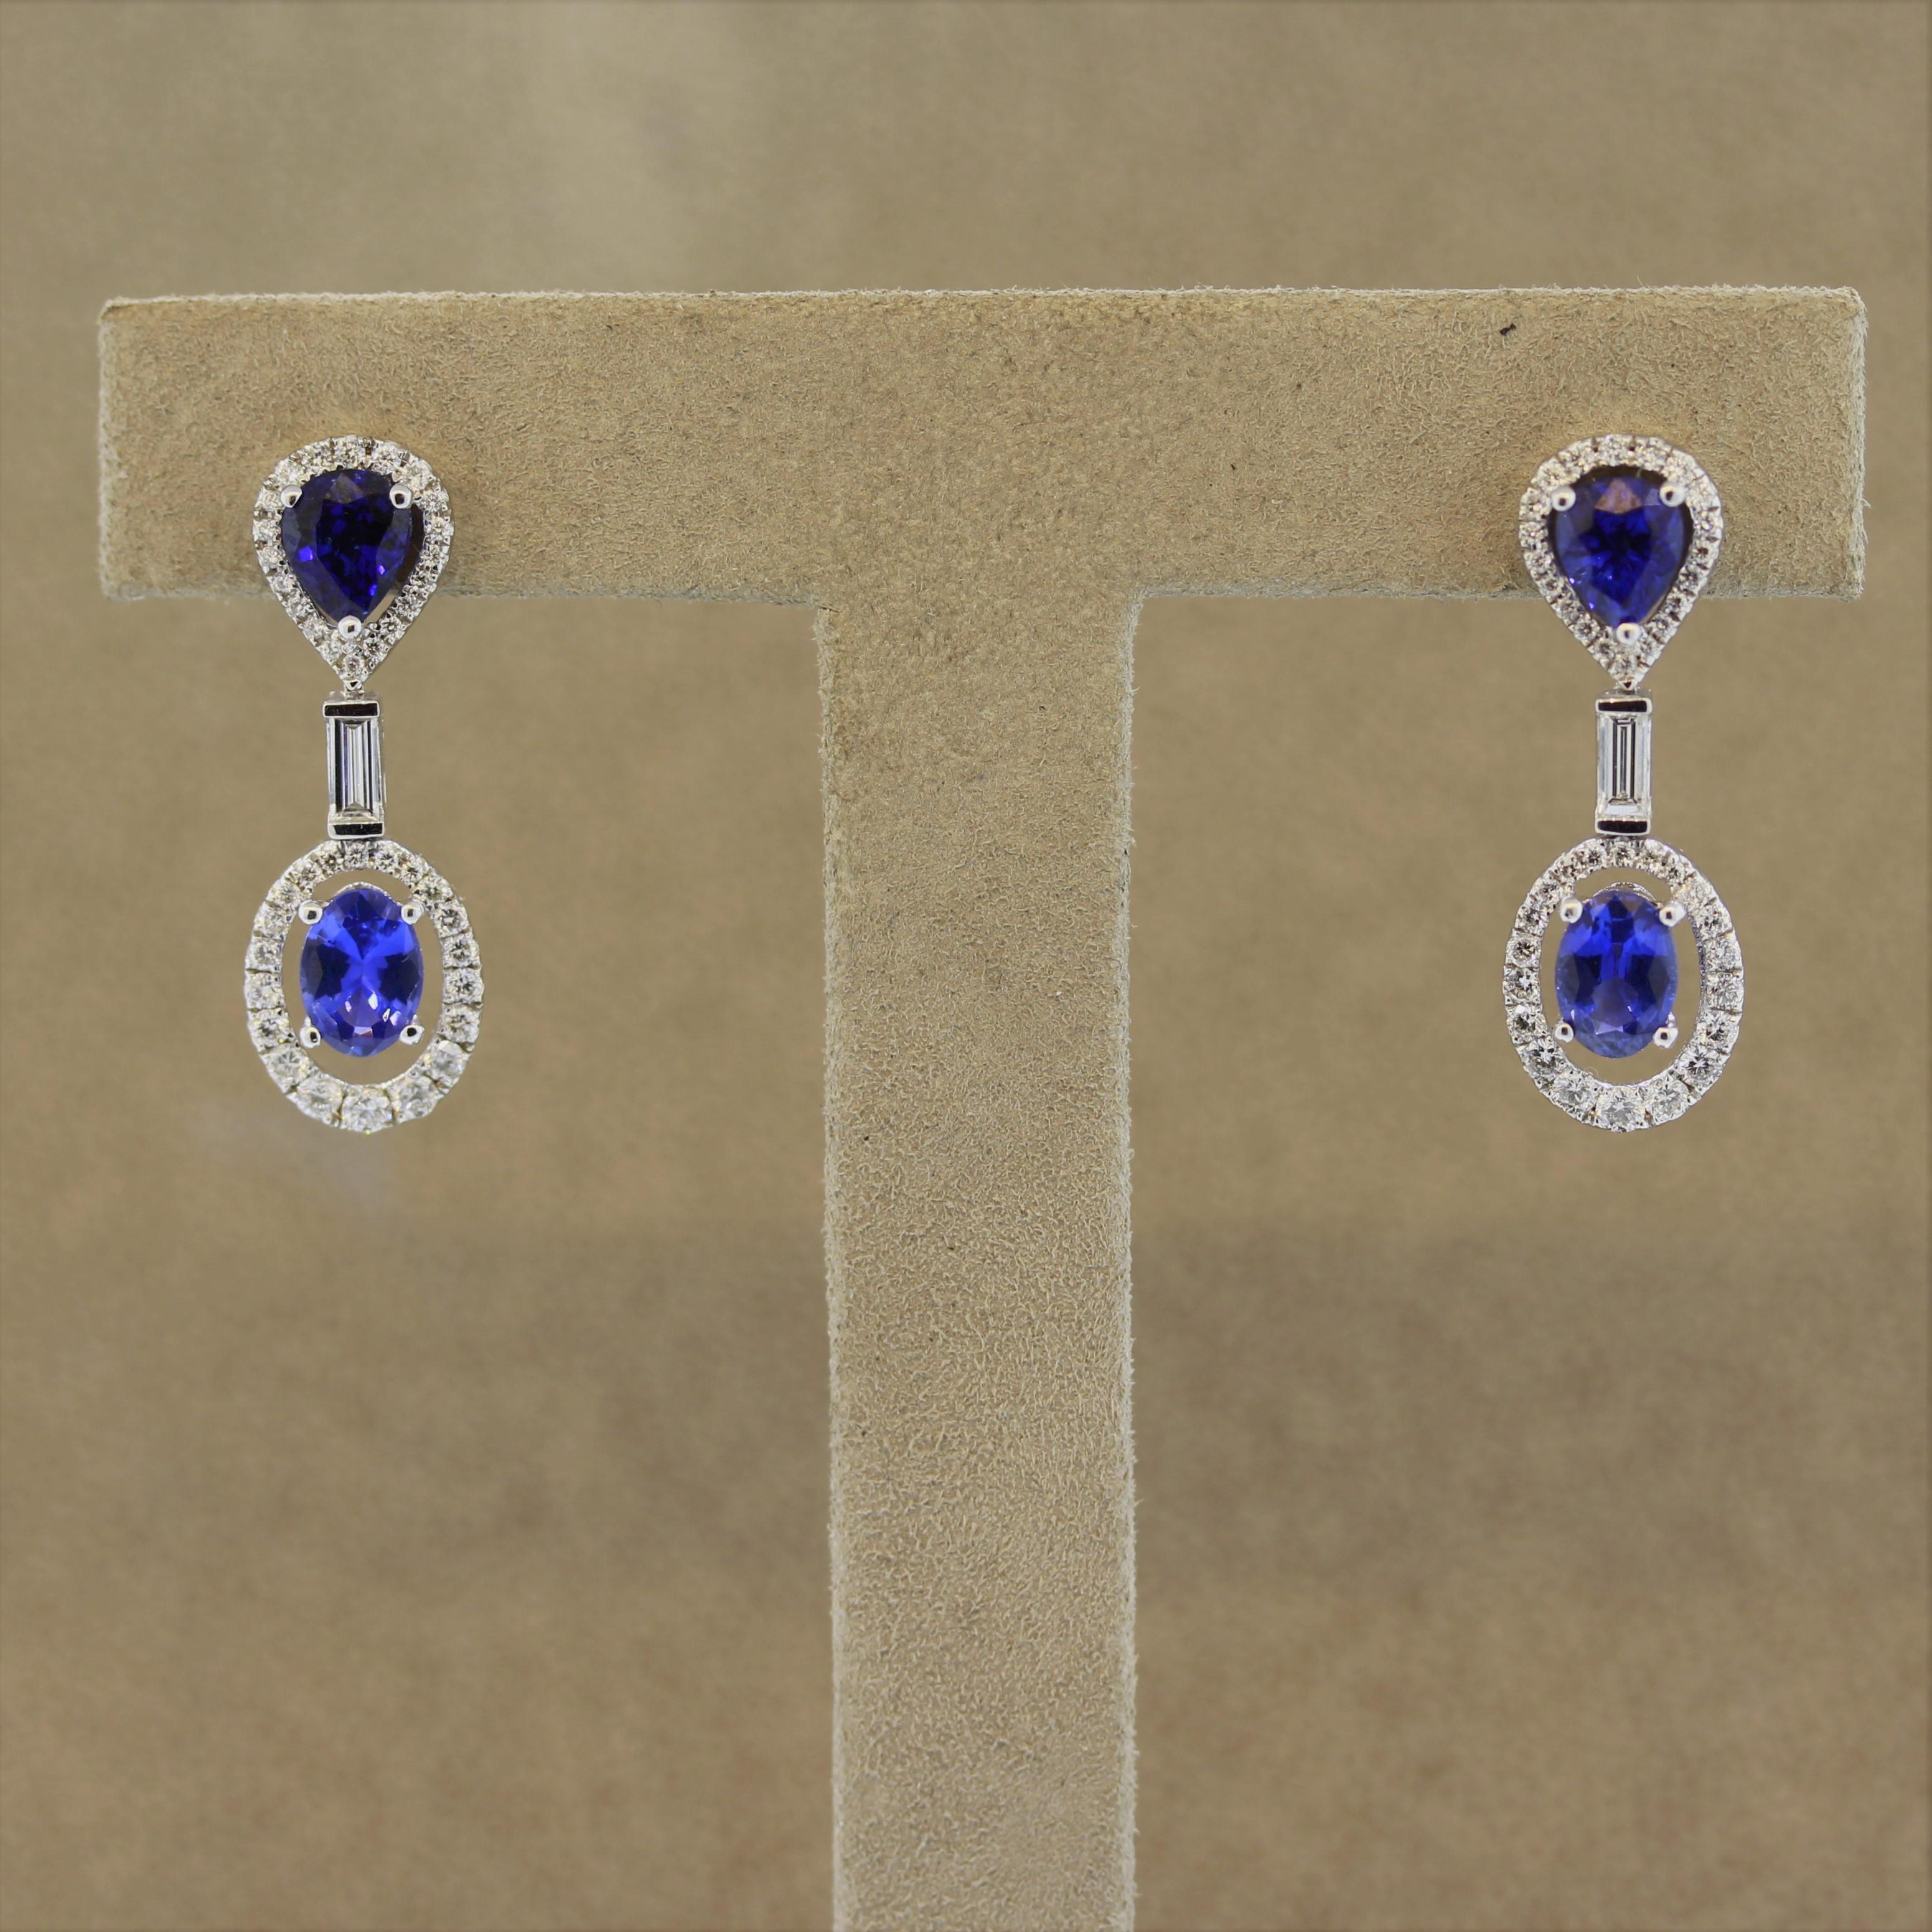 A lovely pair of drop earrings featuring 1.45 carats of blue sapphire. They are complemented by 1.01 carats of round brilliant and baguette cut diamonds set in 18k white gold.

Length: 1.1 inches